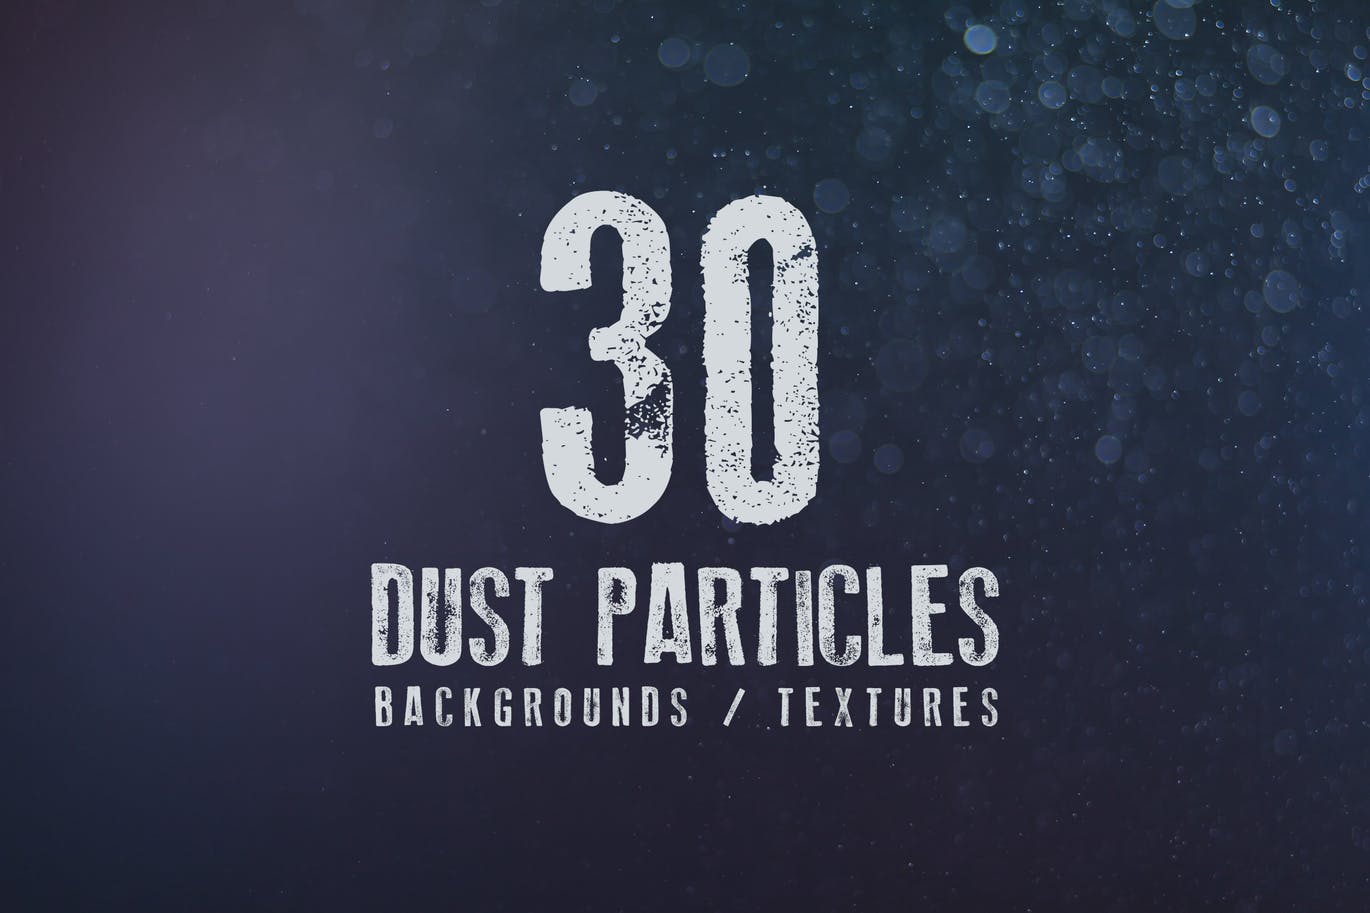 A set of dust particles backgrounds and textures